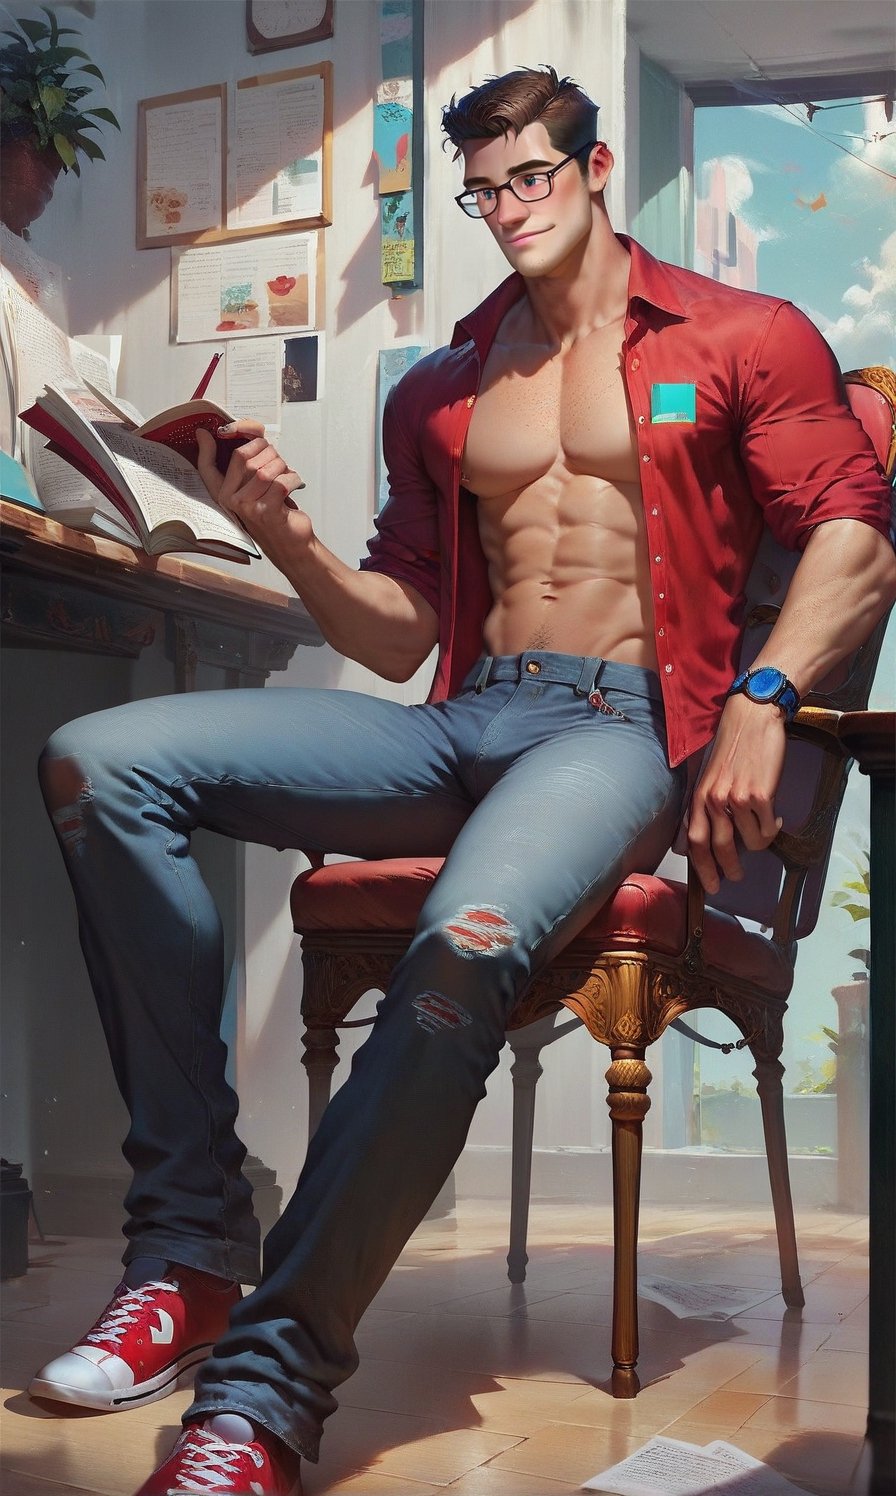 score_9,score_8_up,score_7_up,light source from top,1man,very handsome,glasses,stubble,opened shirt,jeans, show hairly chest,reading newpaper,concept art, sit on chair,